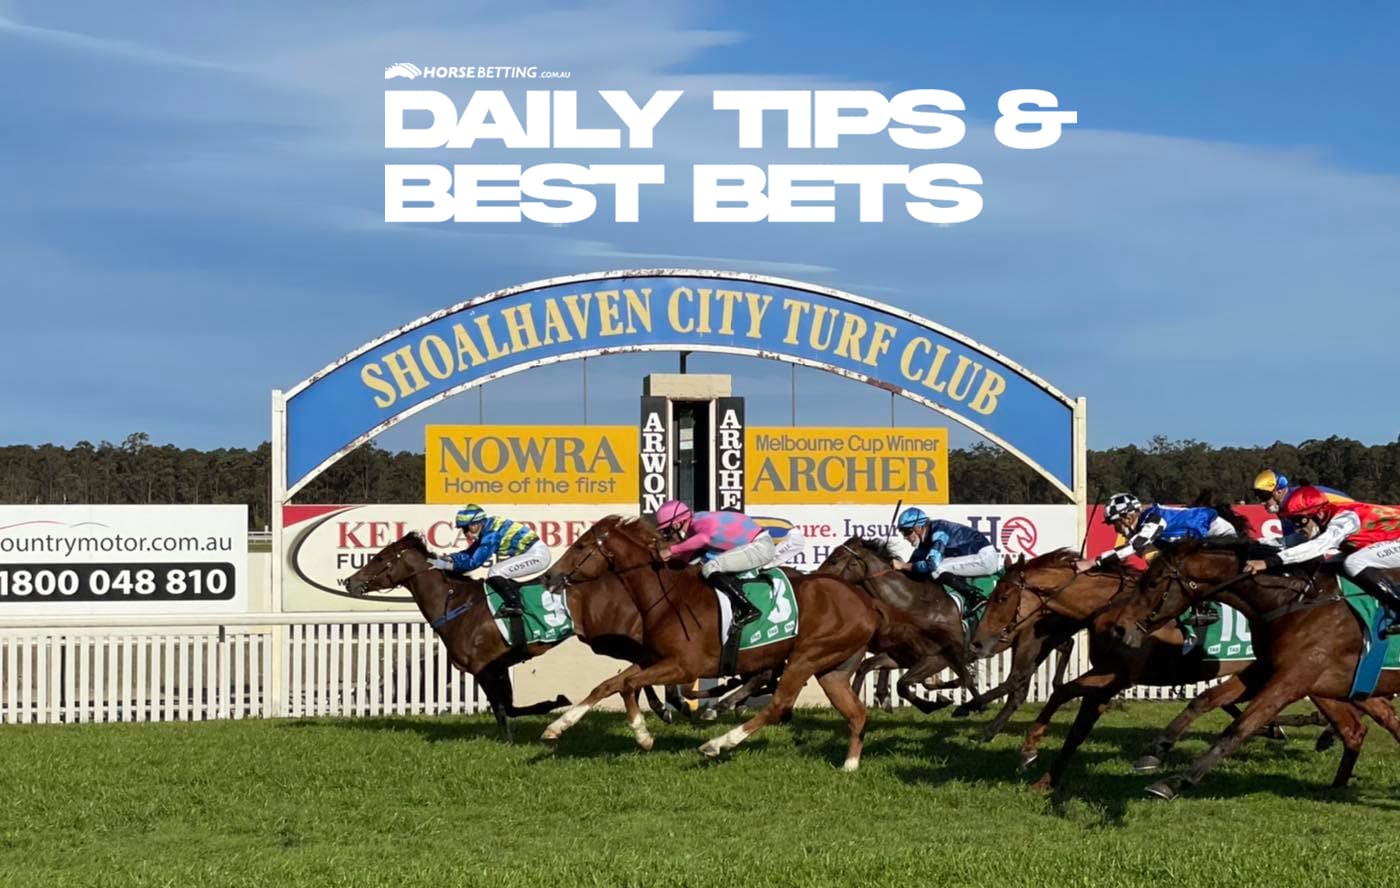 Nowra free horse racing tips & best bets